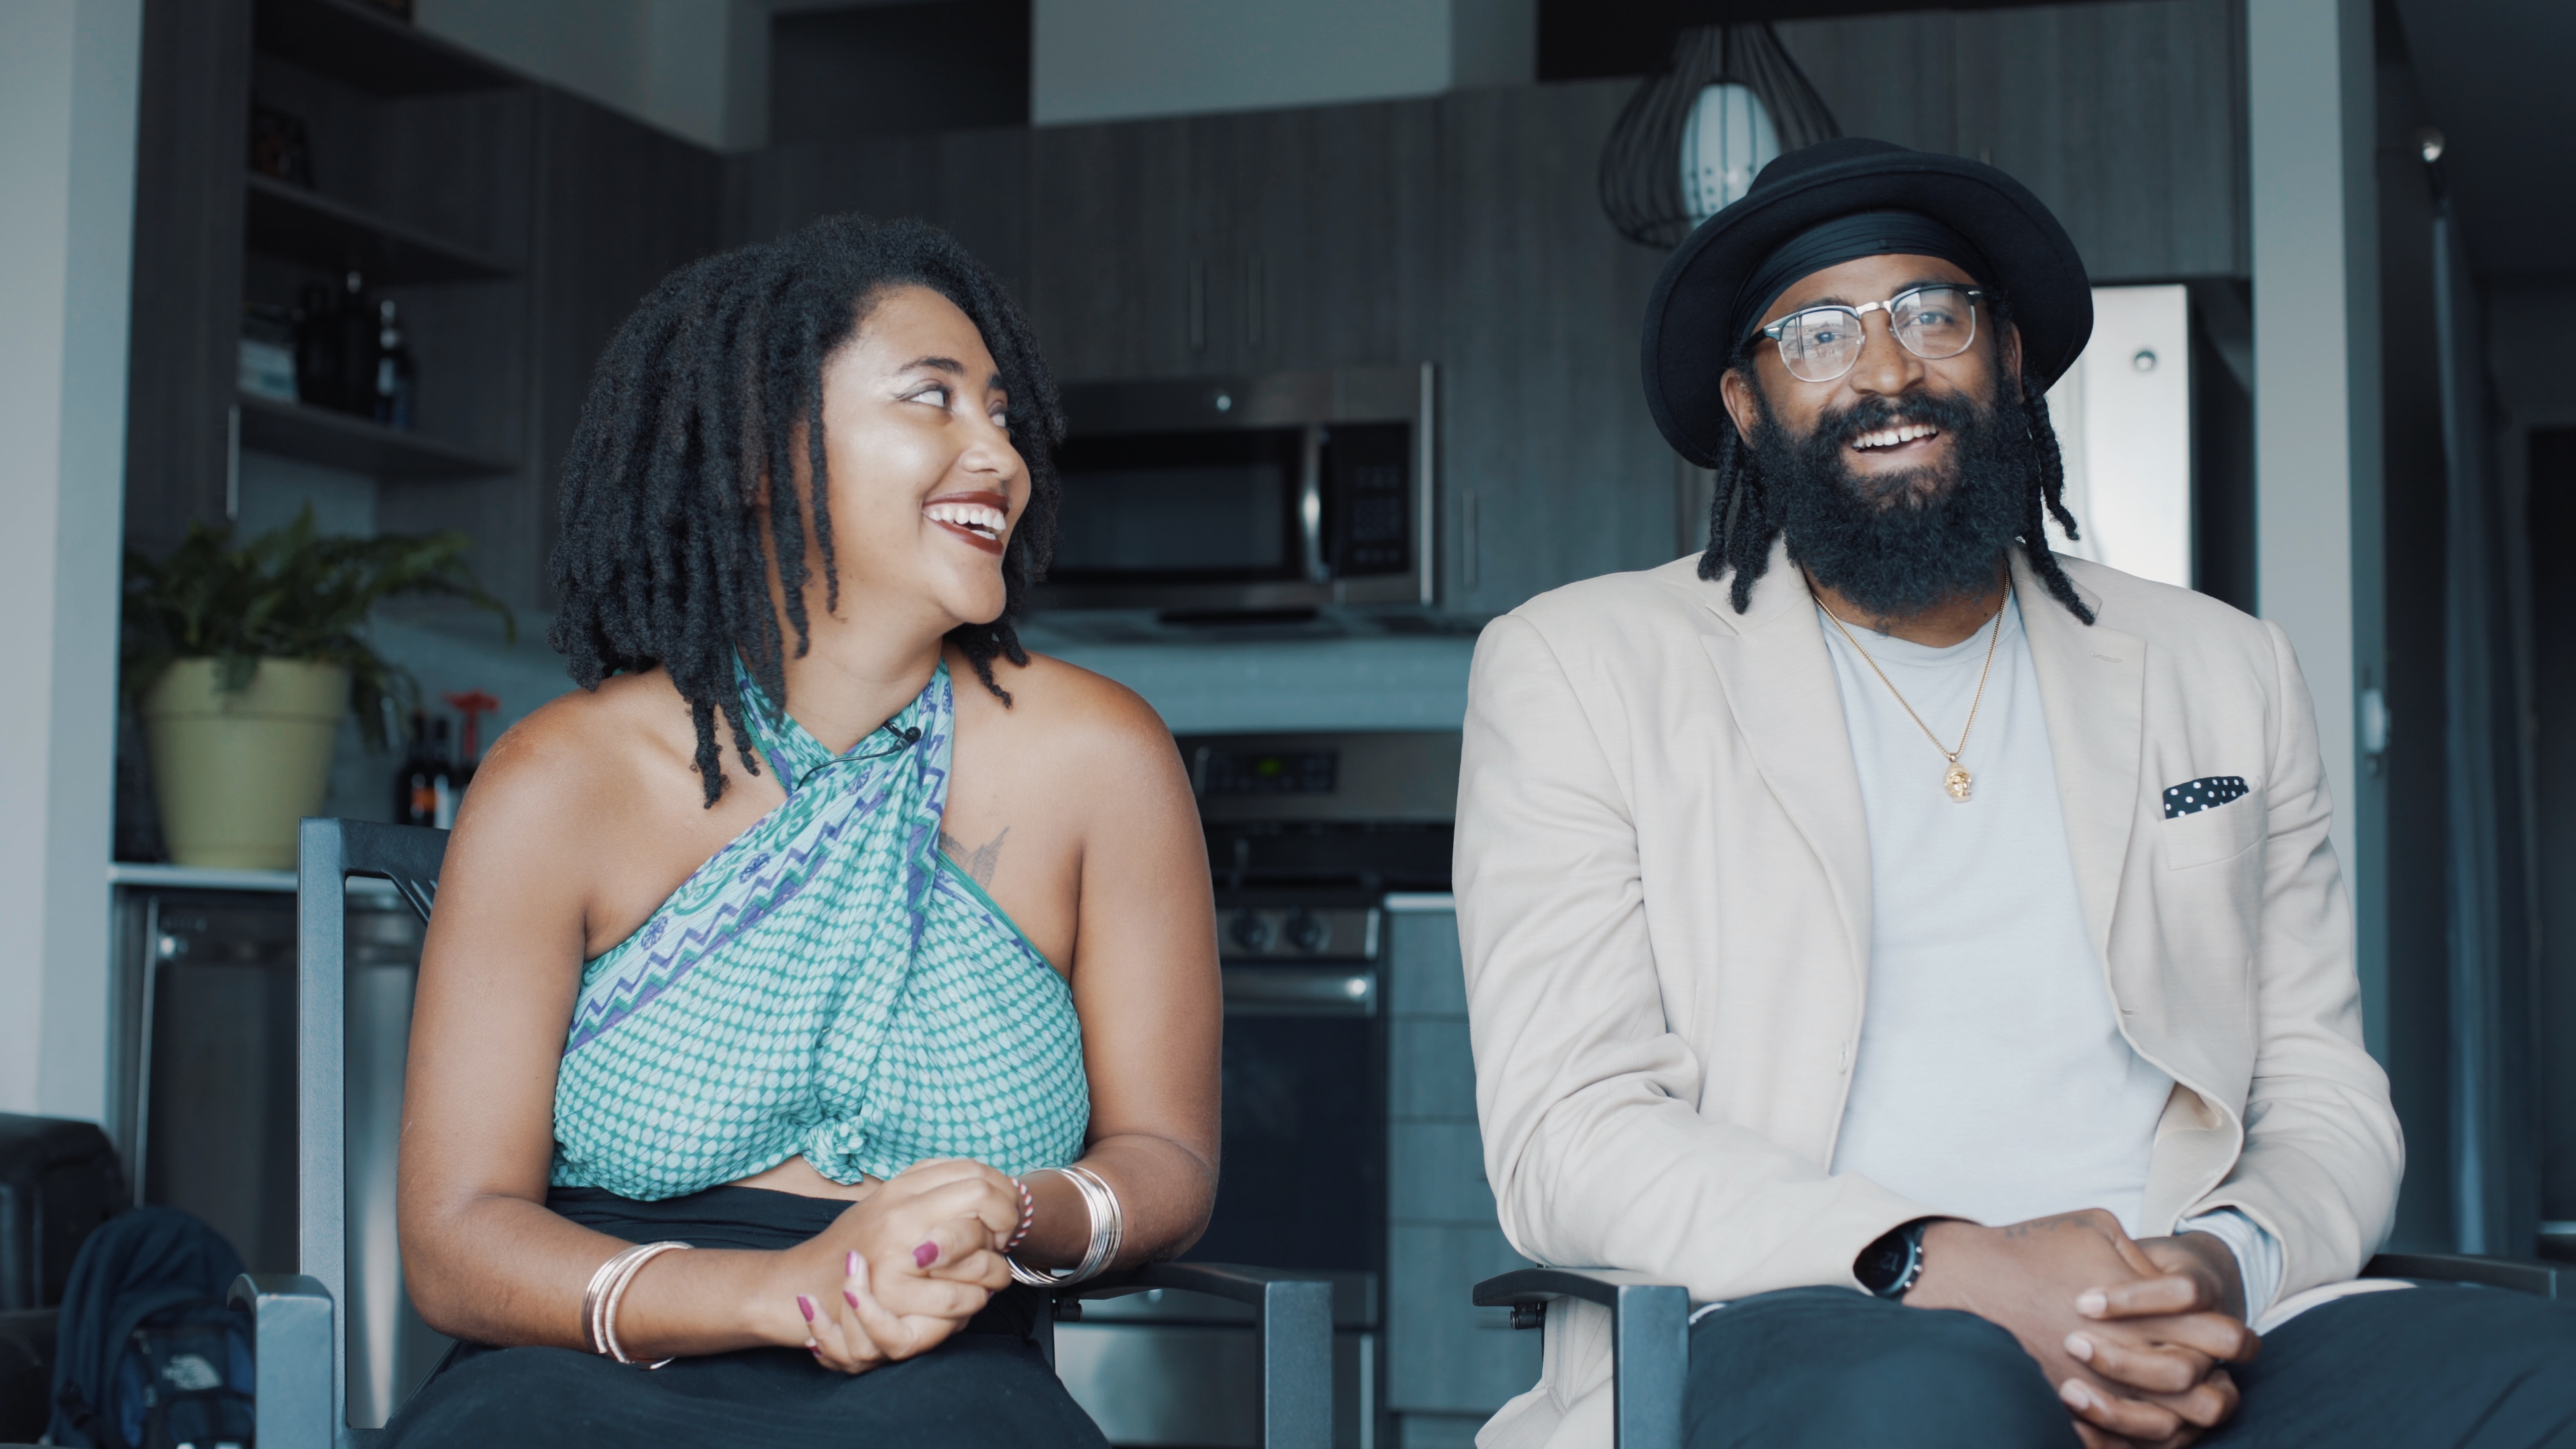 Breaking Borders & Barriers: Meet Ronny and Florence Turiaf